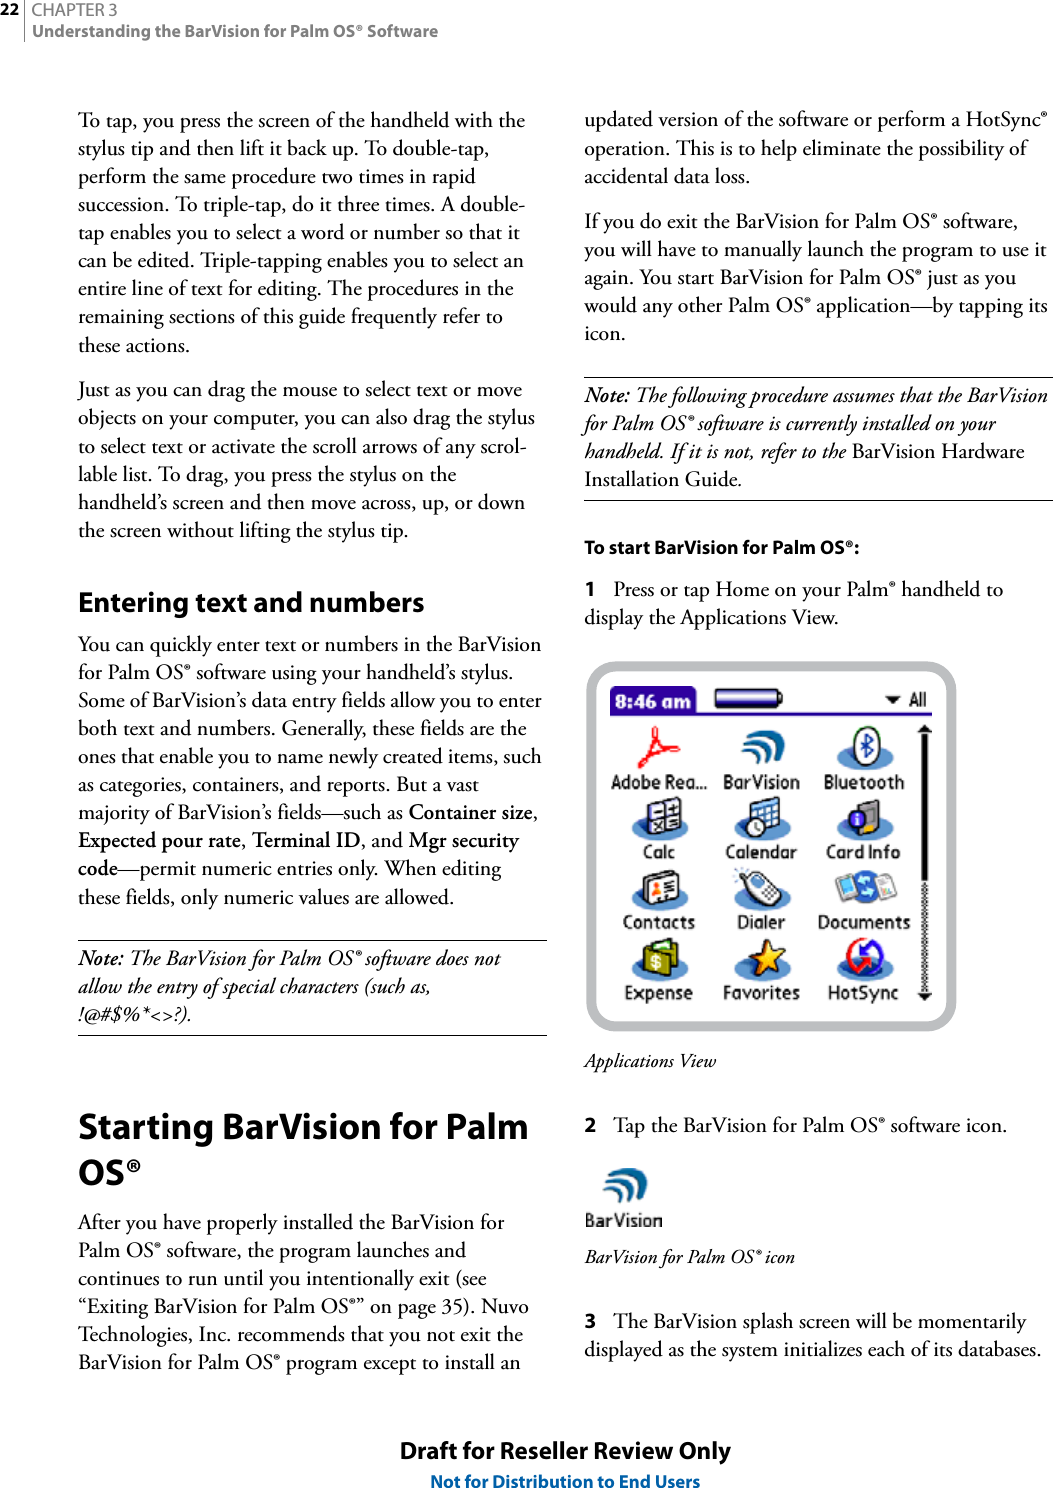 CHAPTER 322Understanding the BarVision for Palm OS® SoftwareDraft for Reseller Review OnlyNot for Distribution to End UsersTo tap, you press the screen of the handheld with the stylus tip and then lift it back up. To double-tap, perform the same procedure two times in rapid succession. To triple-tap, do it three times. A double-tap enables you to select a word or number so that it can be edited. Triple-tapping enables you to select an entire line of text for editing. The procedures in the remaining sections of this guide frequently refer to these actions.Just as you can drag the mouse to select text or move objects on your computer, you can also drag the stylus to select text or activate the scroll arrows of any scrol-lable list. To drag, you press the stylus on the handheld’s screen and then move across, up, or down the screen without lifting the stylus tip.Entering text and numbersYou can quickly enter text or numbers in the BarVision for Palm OS® software using your handheld’s stylus. Some of BarVision’s data entry fields allow you to enter both text and numbers. Generally, these fields are the ones that enable you to name newly created items, such as categories, containers, and reports. But a vast majority of BarVision’s fields—such as Container size, Expected pour rate, Ter mi n a l  ID , and Mgr security code—permit numeric entries only. When editing these fields, only numeric values are allowed.Note: The BarVision for Palm OS® software does not allow the entry of special characters (such as, !@#$%*&lt;&gt;?).Starting BarVision for Palm OS®After you have properly installed the BarVision for Palm OS® software, the program launches and continues to run until you intentionally exit (see “Exiting BarVision for Palm OS®” on page 35). Nuvo Technologies, Inc. recommends that you not exit the BarVision for Palm OS® program except to install an updated version of the software or perform a HotSync® operation. This is to help eliminate the possibility of accidental data loss.If you do exit the BarVision for Palm OS® software, you will have to manually launch the program to use it again. You start BarVision for Palm OS® just as you would any other Palm OS® application—by tapping its icon.Note: The following procedure assumes that the BarVision for Palm OS® software is currently installed on your handheld. If it is not, refer to the BarVision Hardware Installation Guide.To start BarVision for Palm OS®:1Press or tap Home on your Palm® handheld to display the Applications View.Applications View2Tap the BarVision for Palm OS® software icon.BarVision for Palm OS® icon3The BarVision splash screen will be momentarily displayed as the system initializes each of its databases.